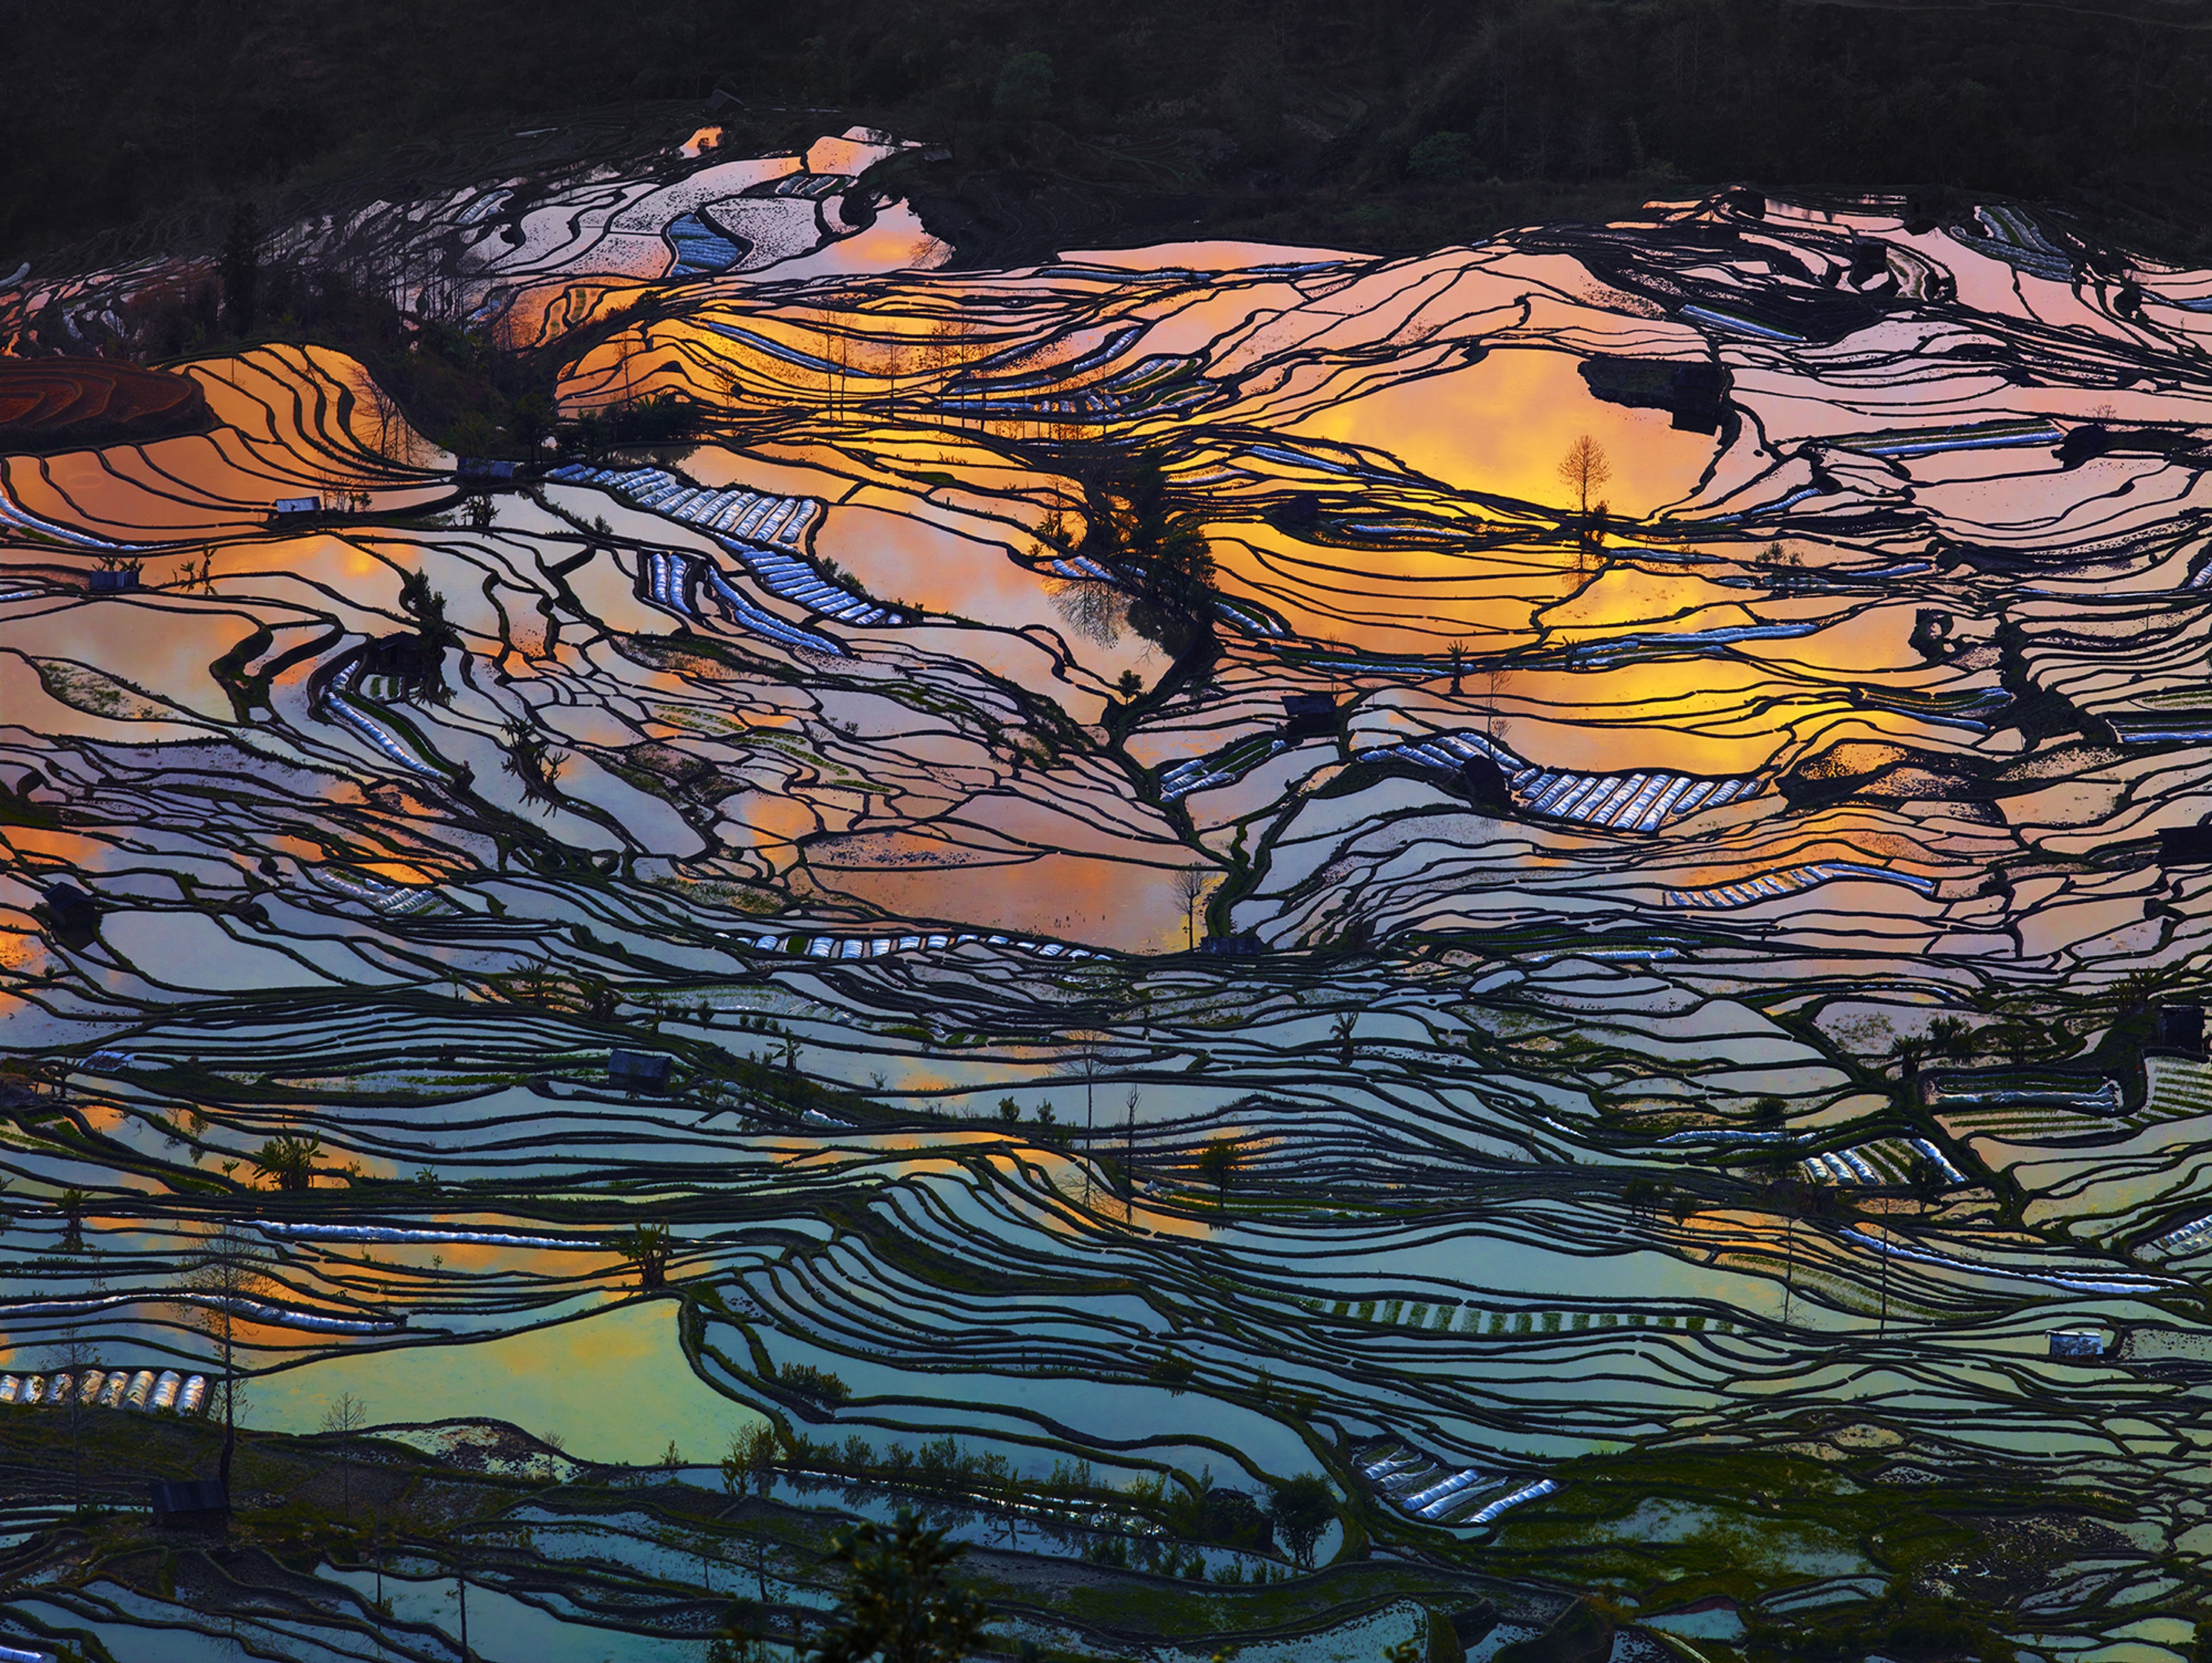 The rice terraces of Yuanyang, in China